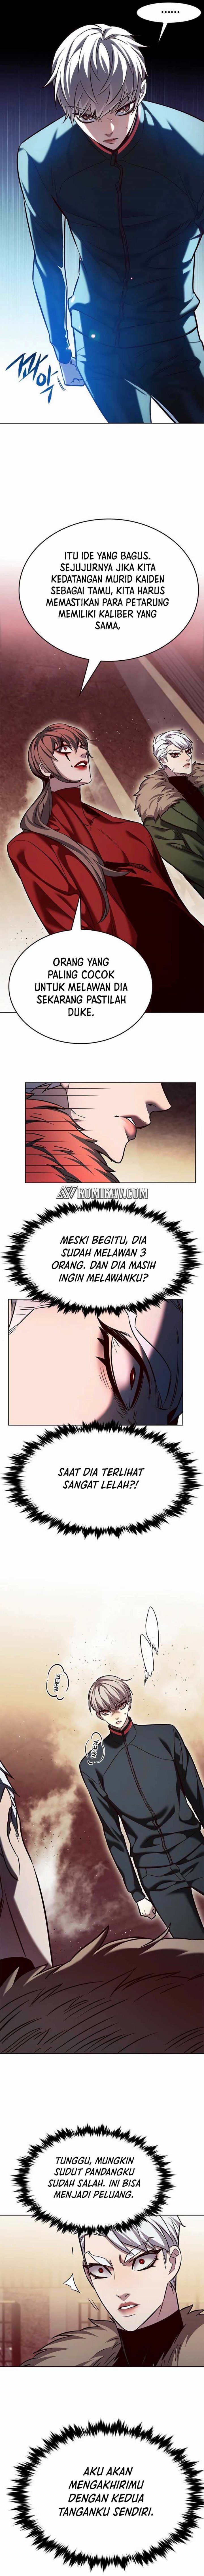 Eleceed Chapter 249